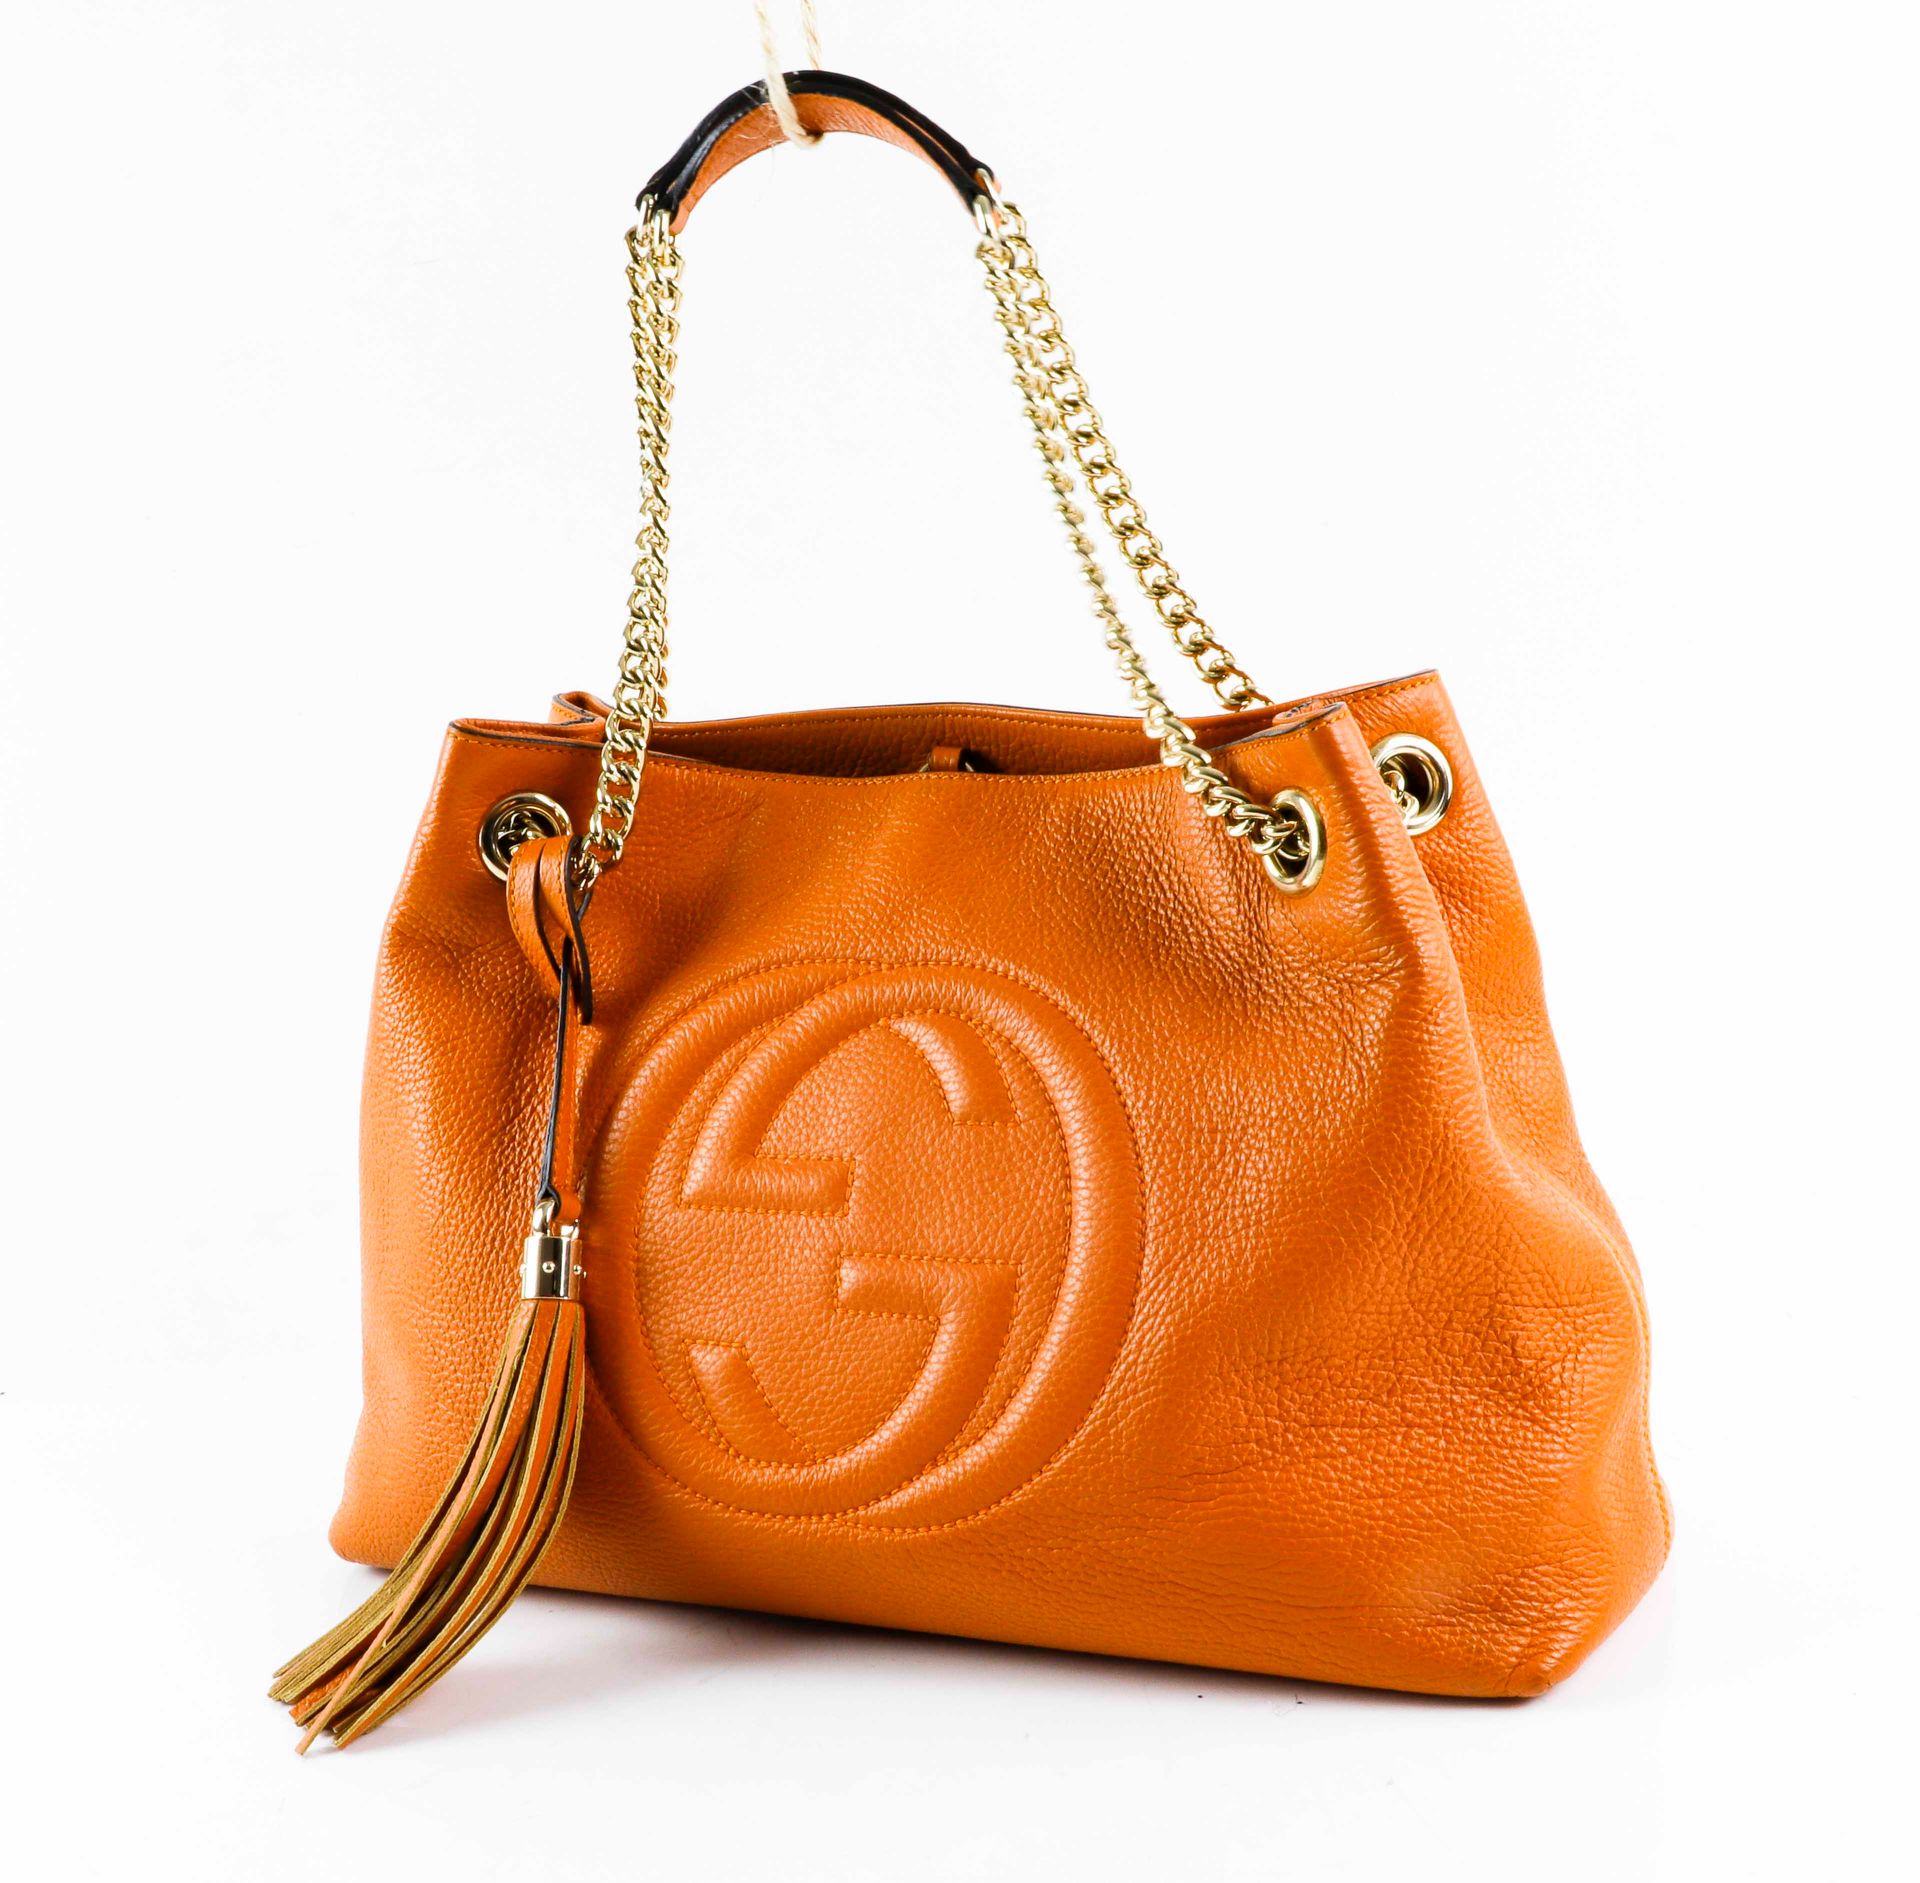 Null GUCCI. Soho" bag in orange grained leather with monogrammed stitching - Dou&hellip;